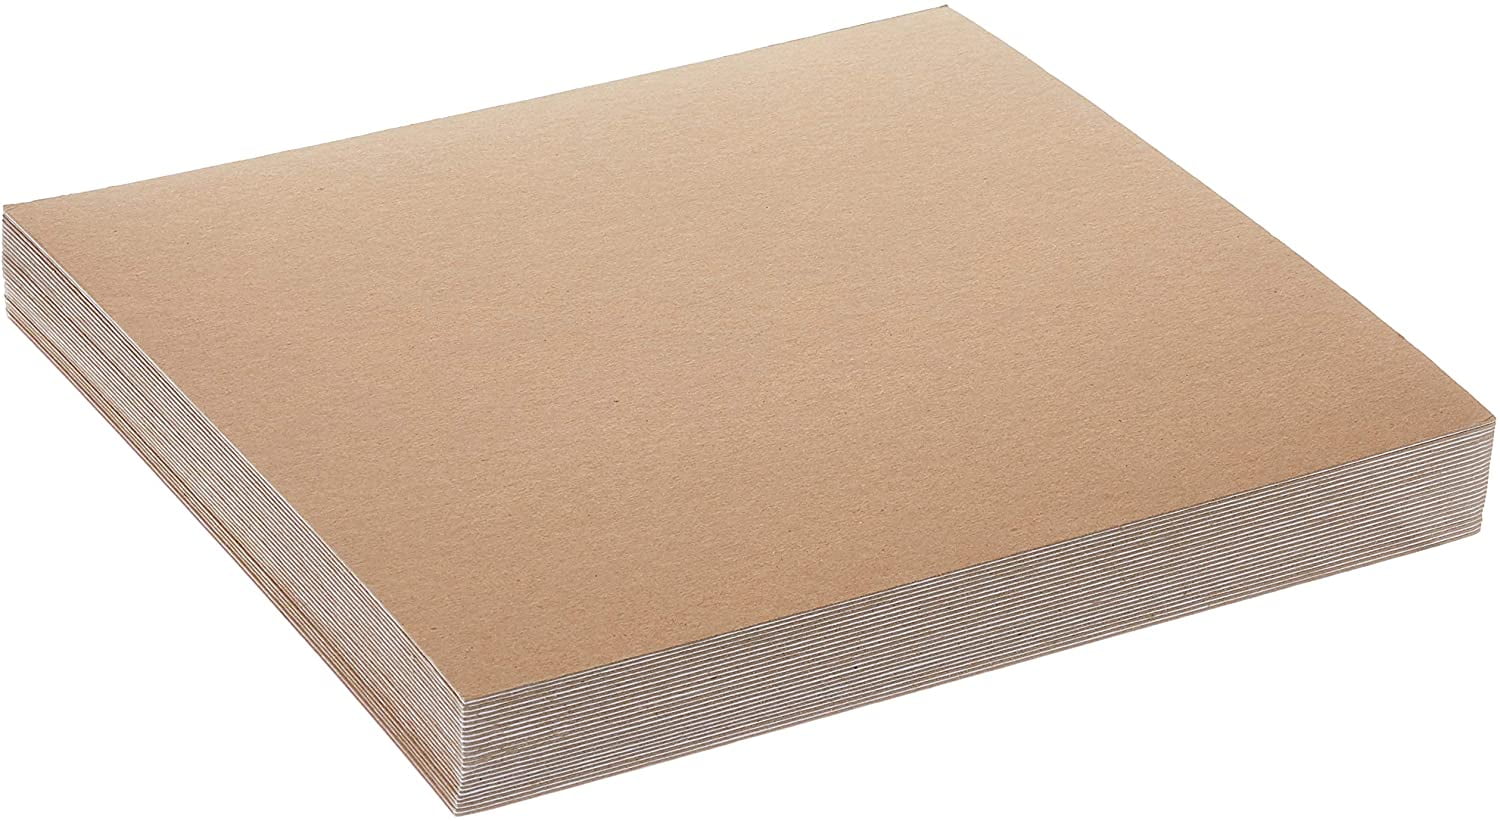 12-Inch by 12-Inch,25-Pack Limited Edition Grafix Medium Weight Chipboard Sheets 